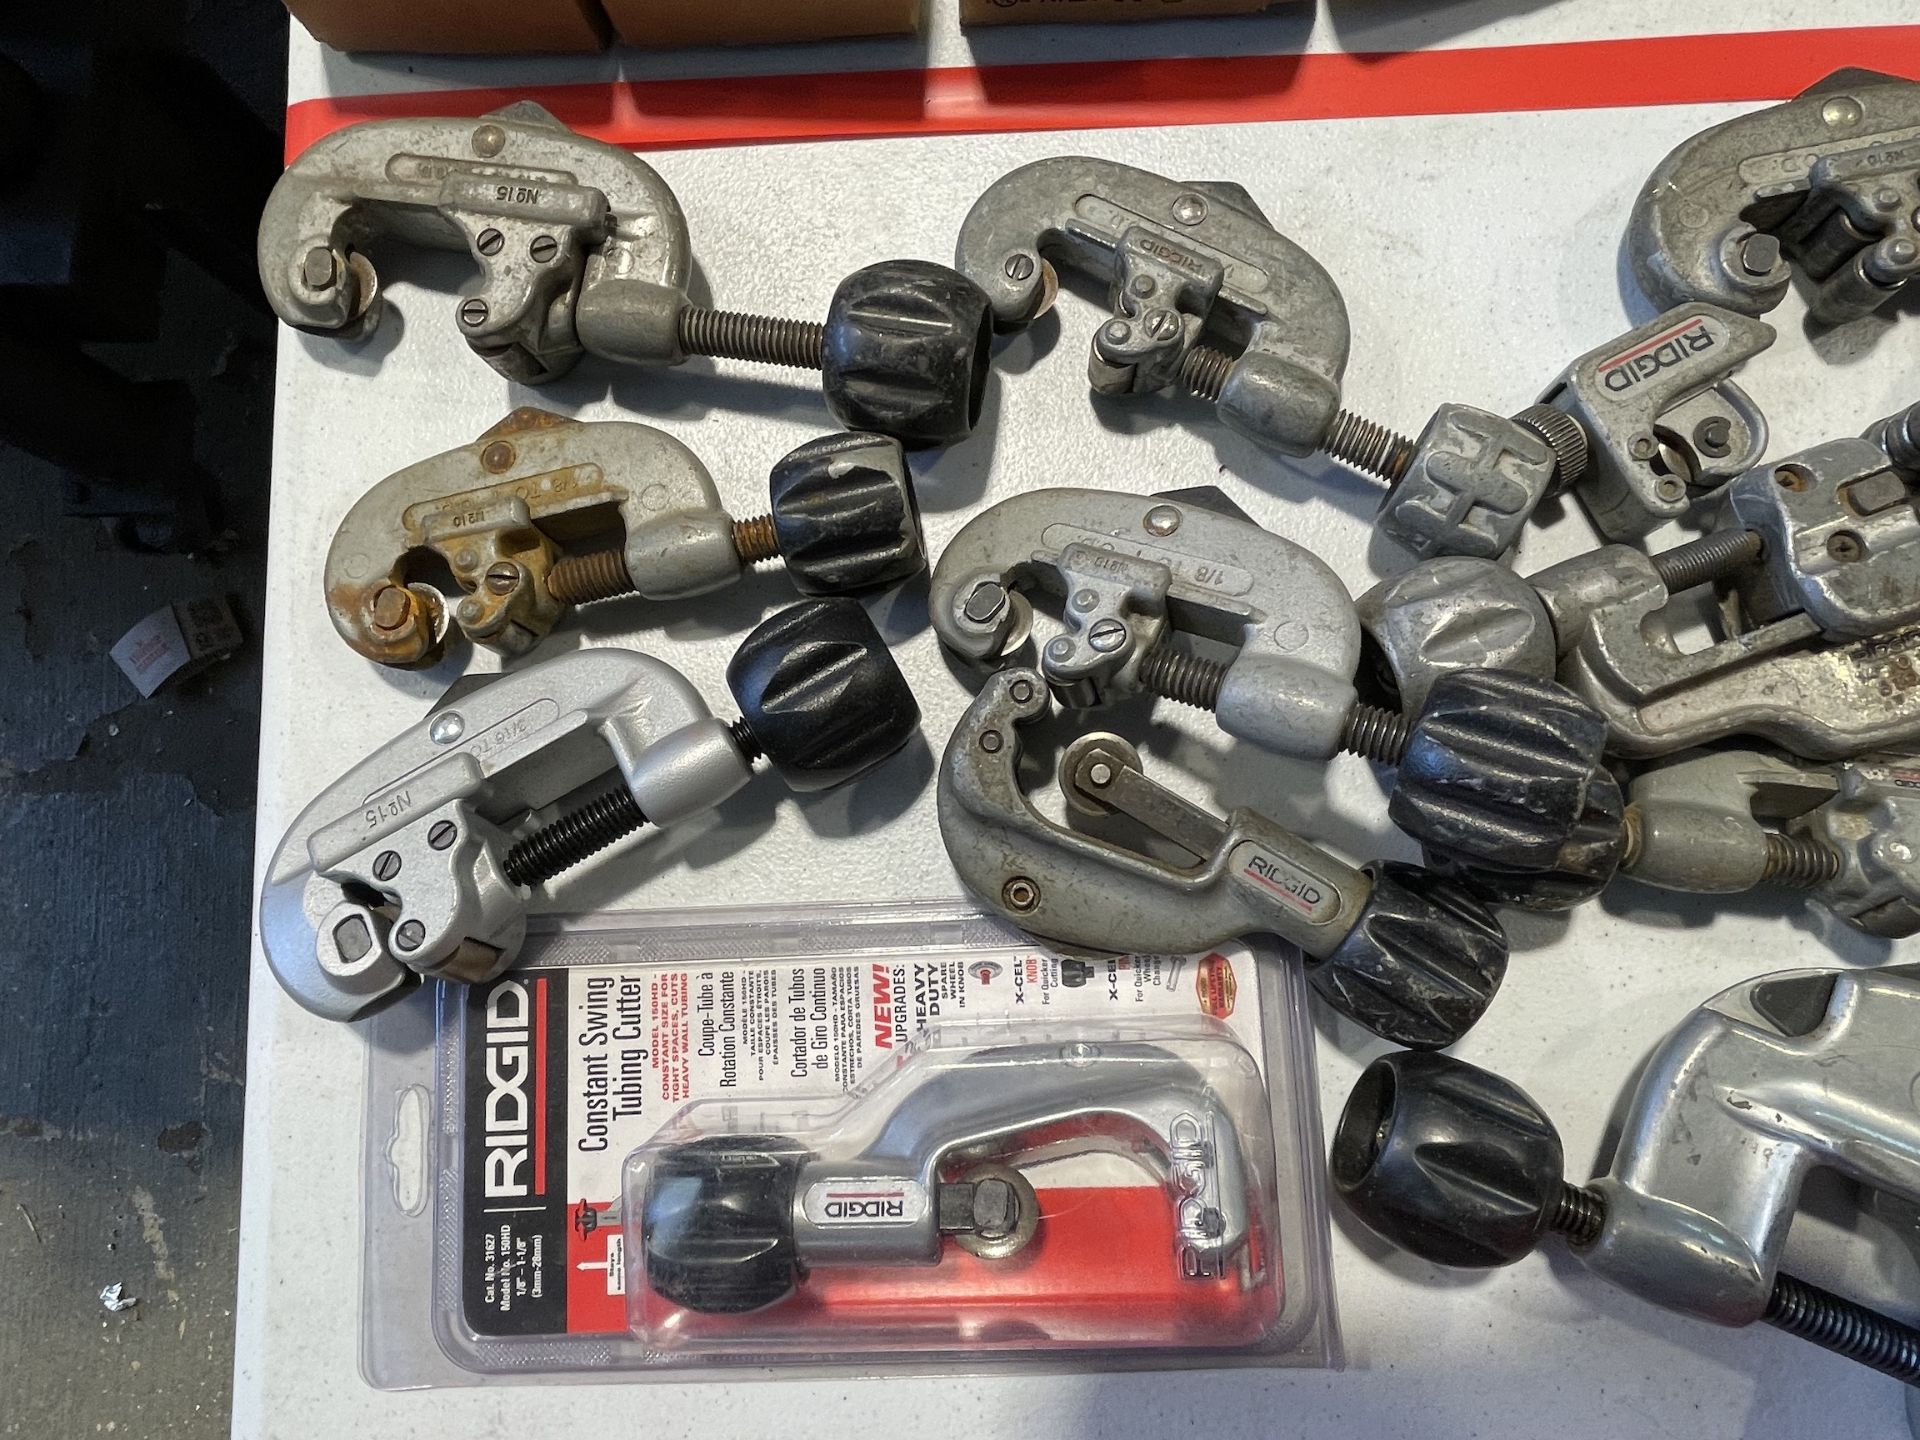 Lot of Swing Tubing Cutters - Upland - Image 4 of 8